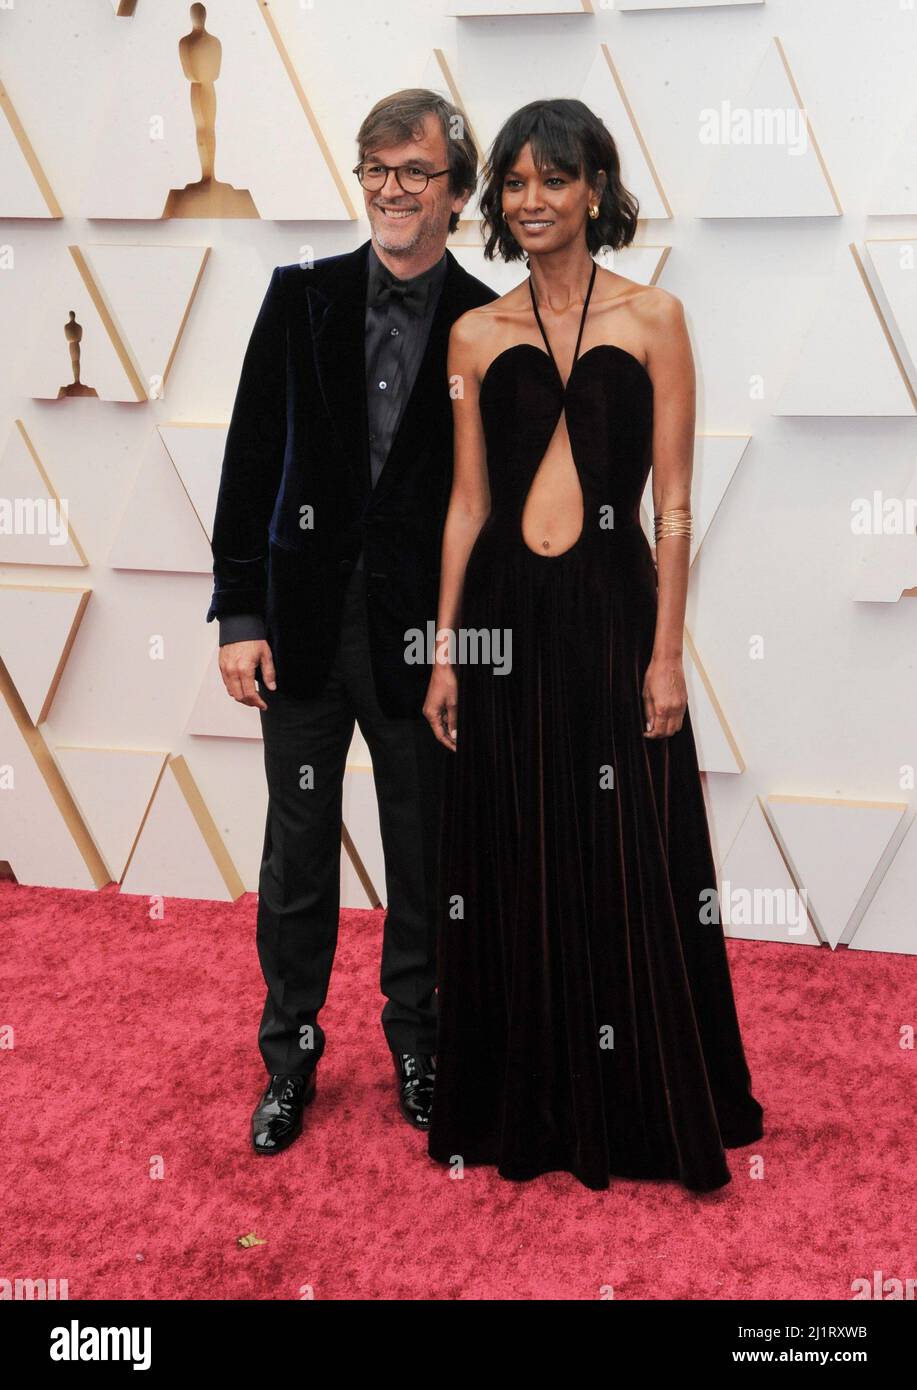 Los Angeles, CA. 27th Mar, 2022. Philippe Rousselet, Liya Kebede at arrivals for 94th Academy Awards - Arrivals 2, Dolby Theatre, Los Angeles, CA March 27, 2022. Credit: Elizabeth Goodenough/Everett Collection/Alamy Live News Stock Photo